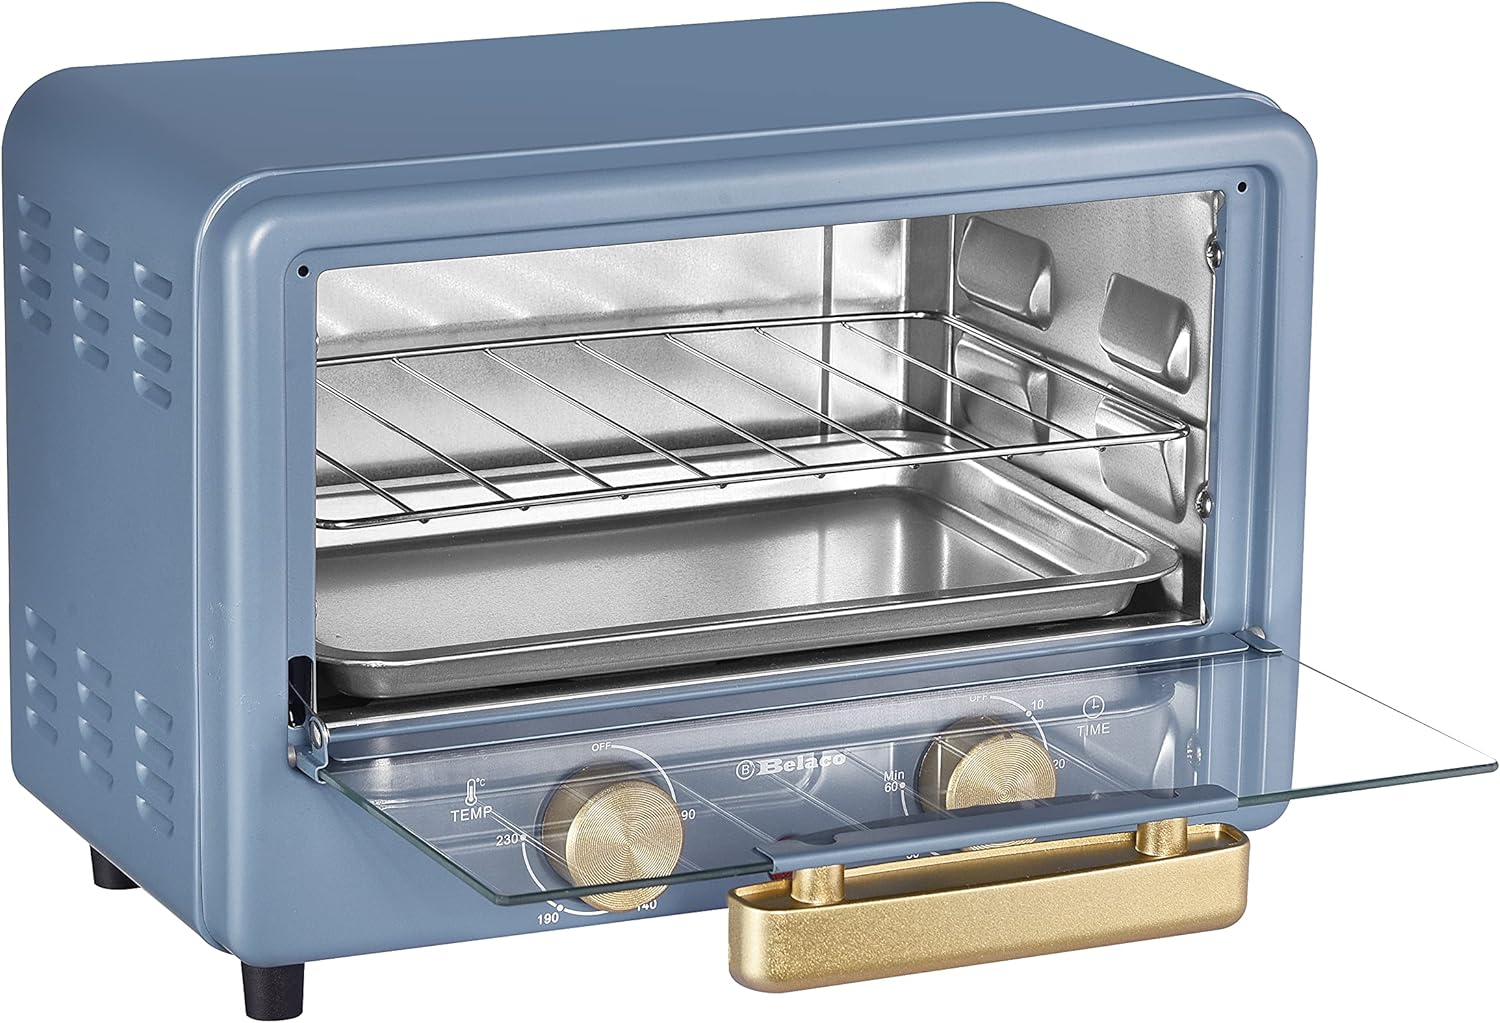 Belaco BTO-1010L Retro look Mini 10L Toaster Oven Tabletop Cooking Baking Portable Oven 750w 60 min Timer 100-230° Stainless Steel Heating Tube incl. Baking Tray Wire Rack [Energy Class A+]